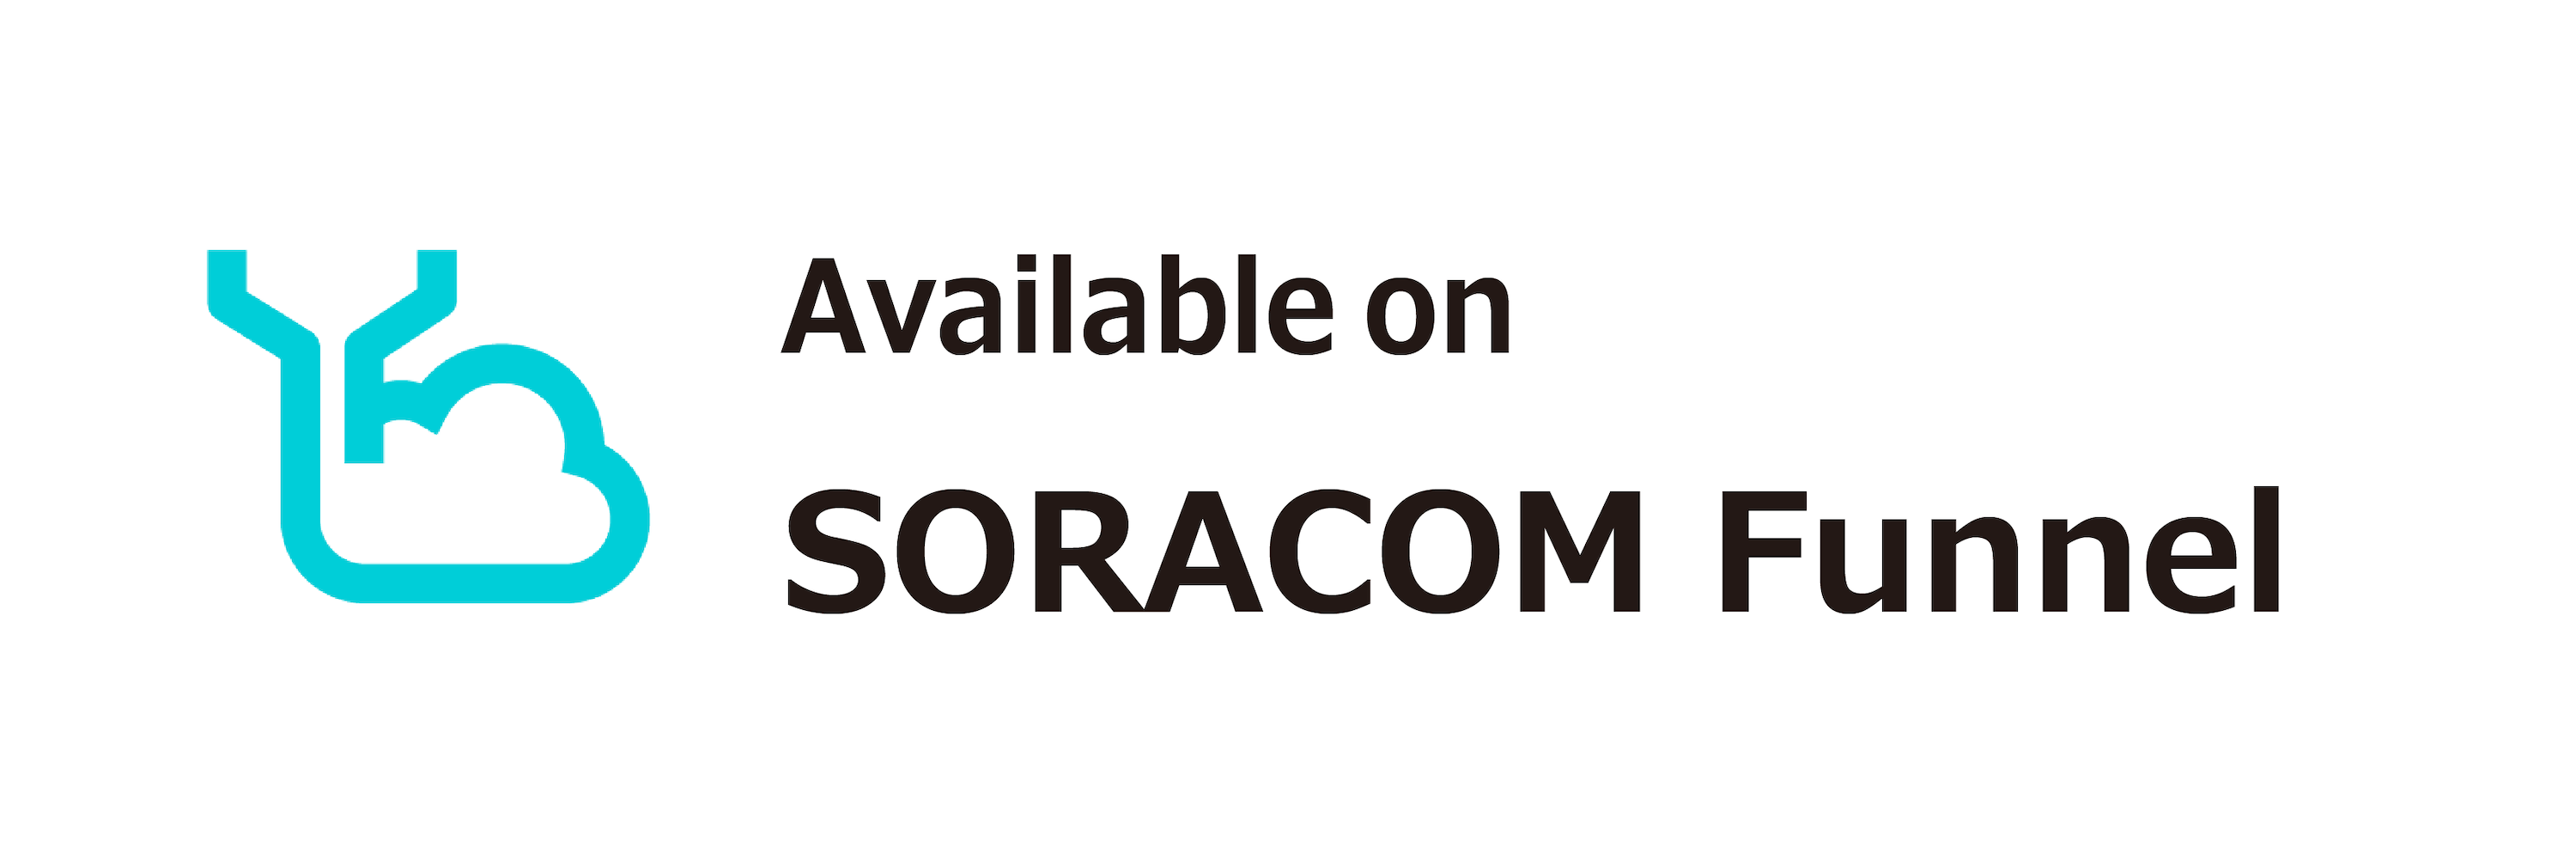 available on SORACOM Funnel